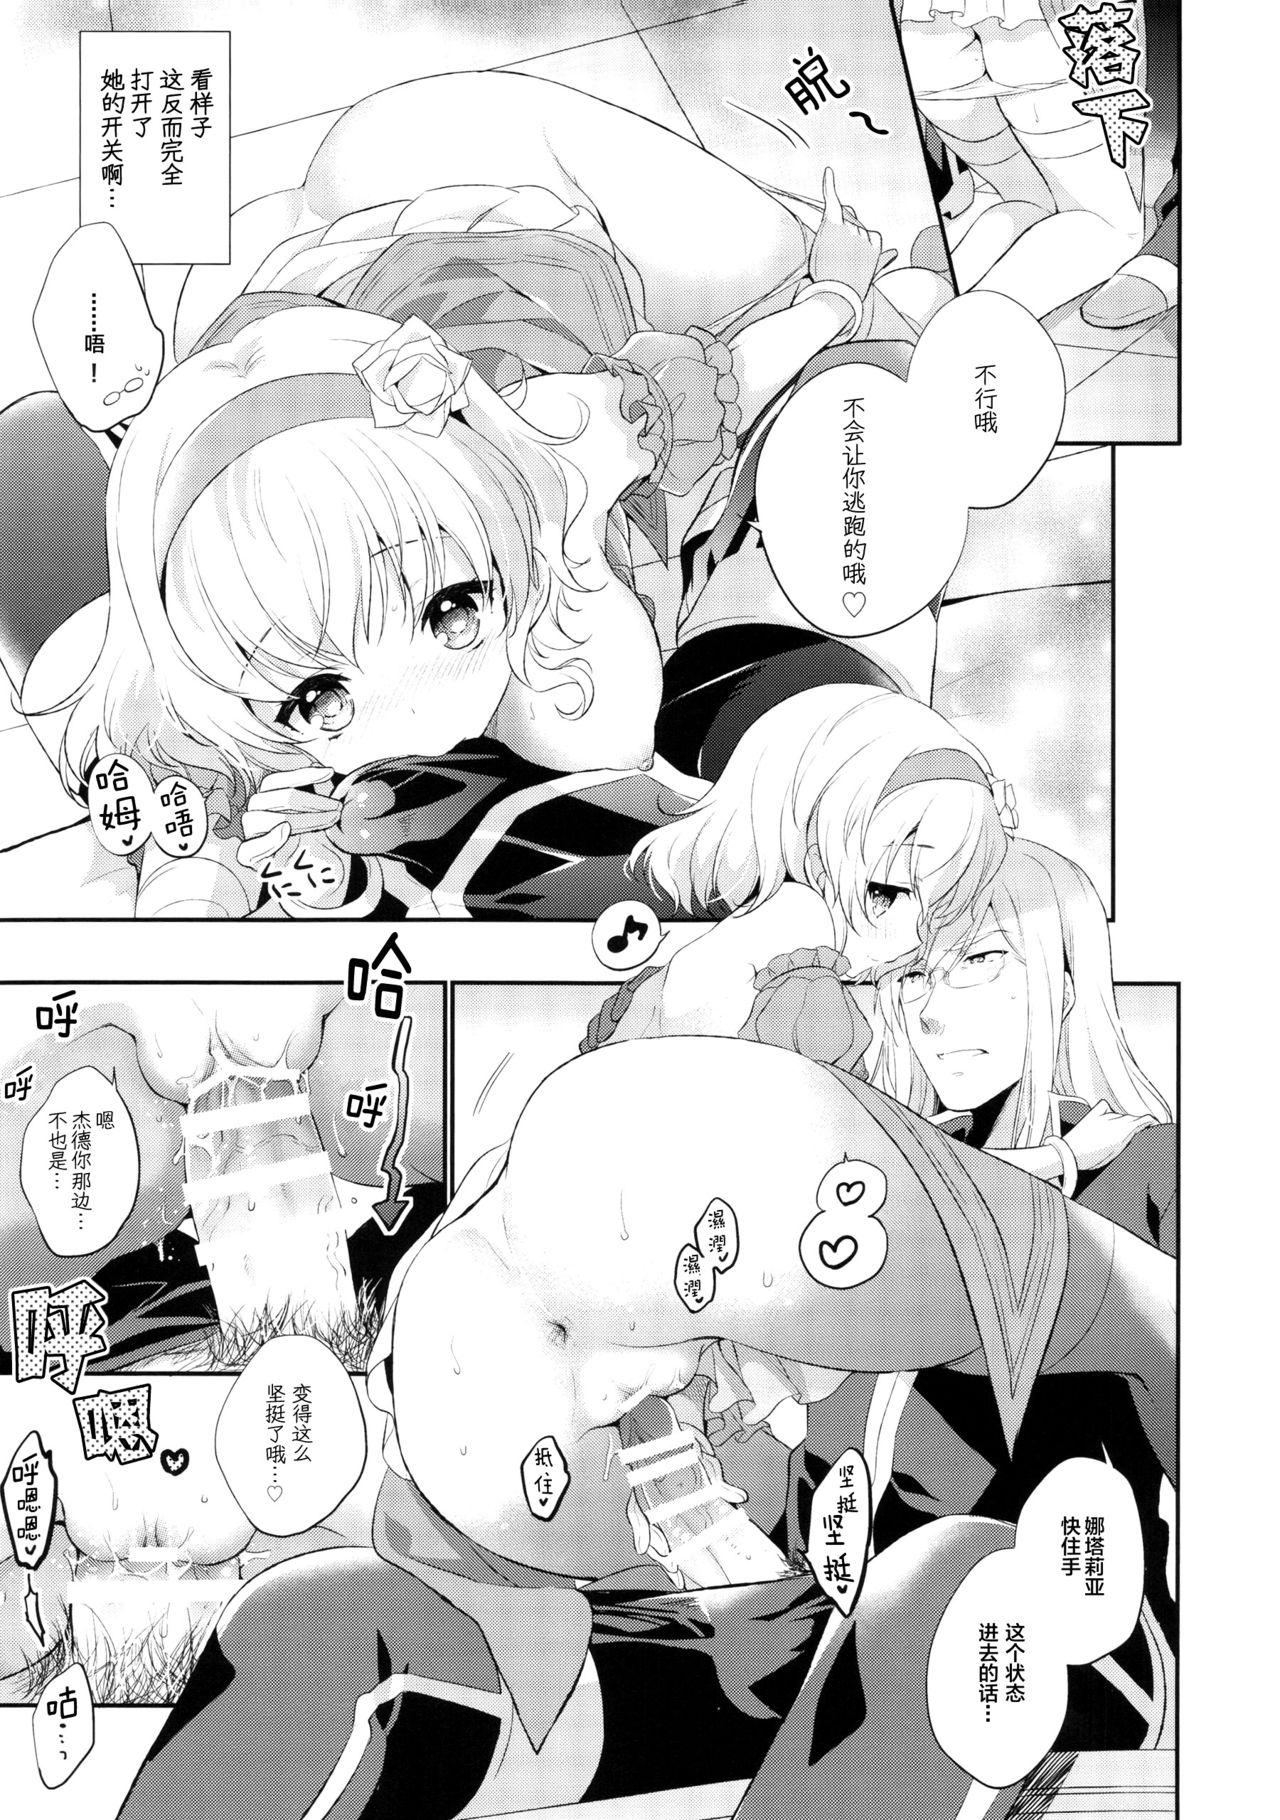 Moan Temptation Princess - Tales of the abyss Ethnic - Page 10